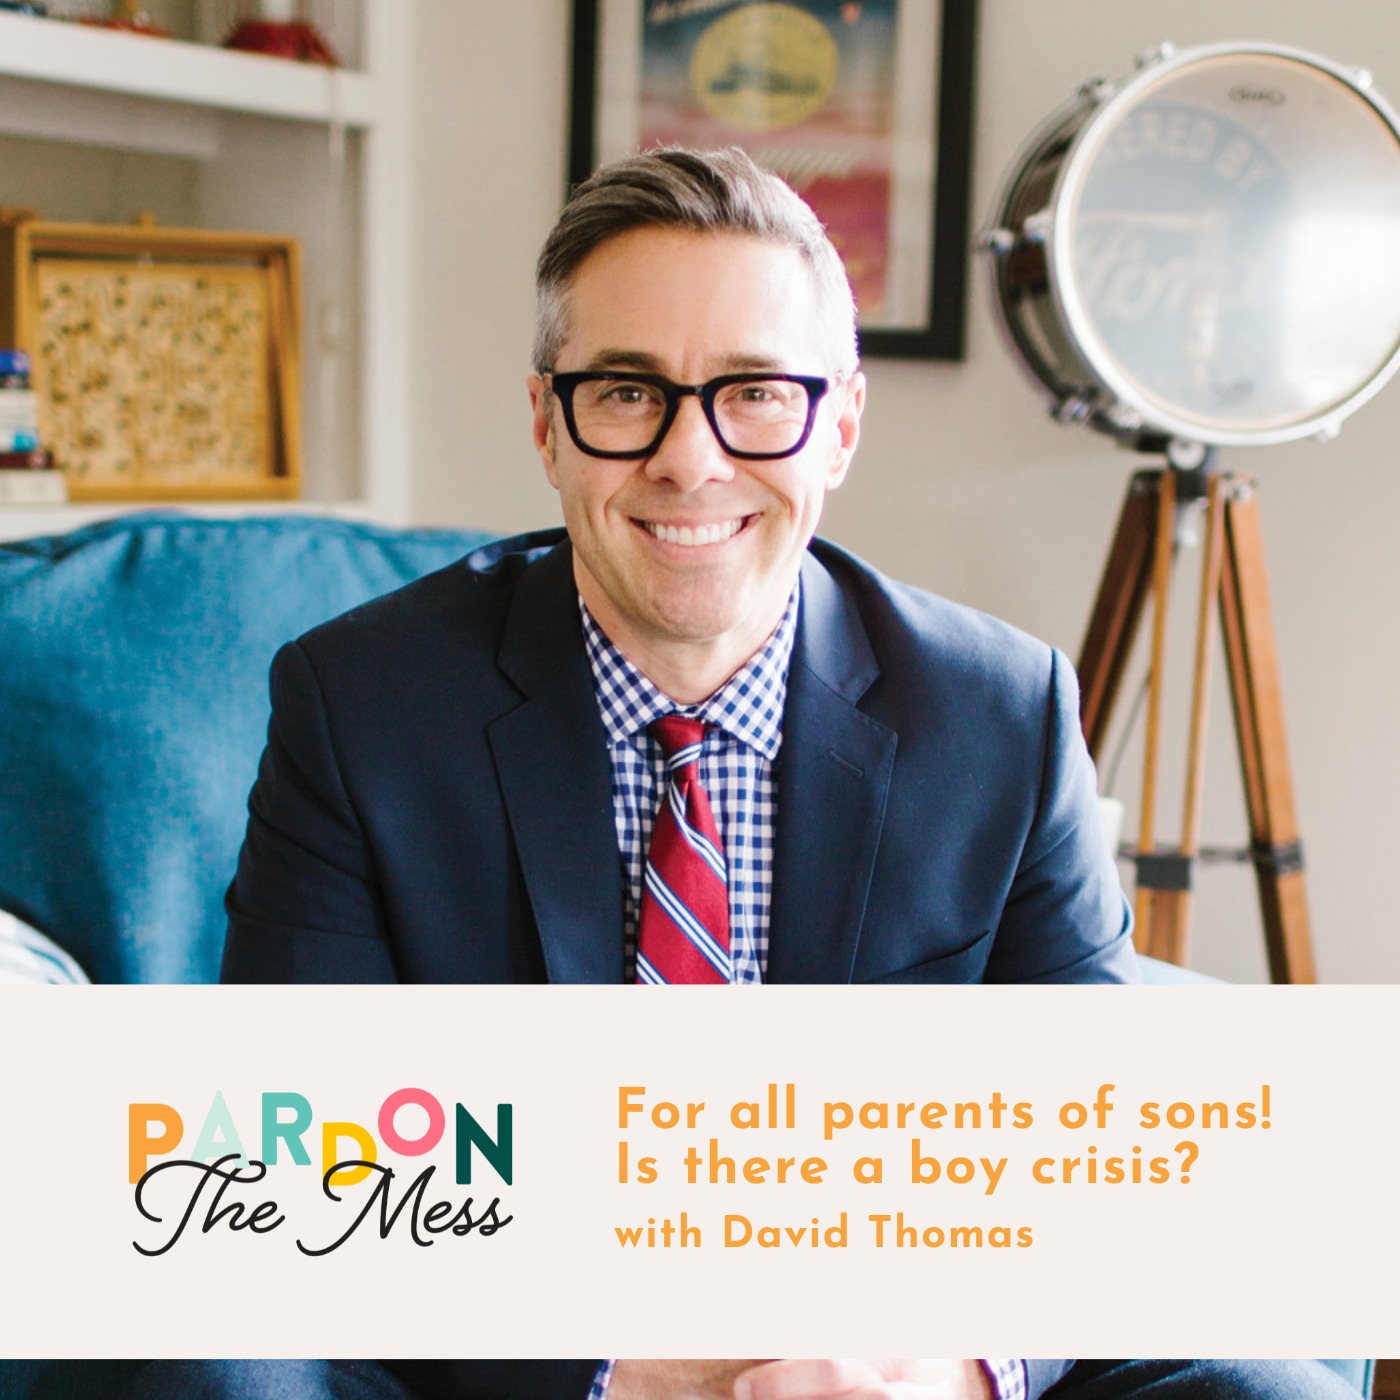 For all parents of sons! Is there a boy crisis? with David Thomas